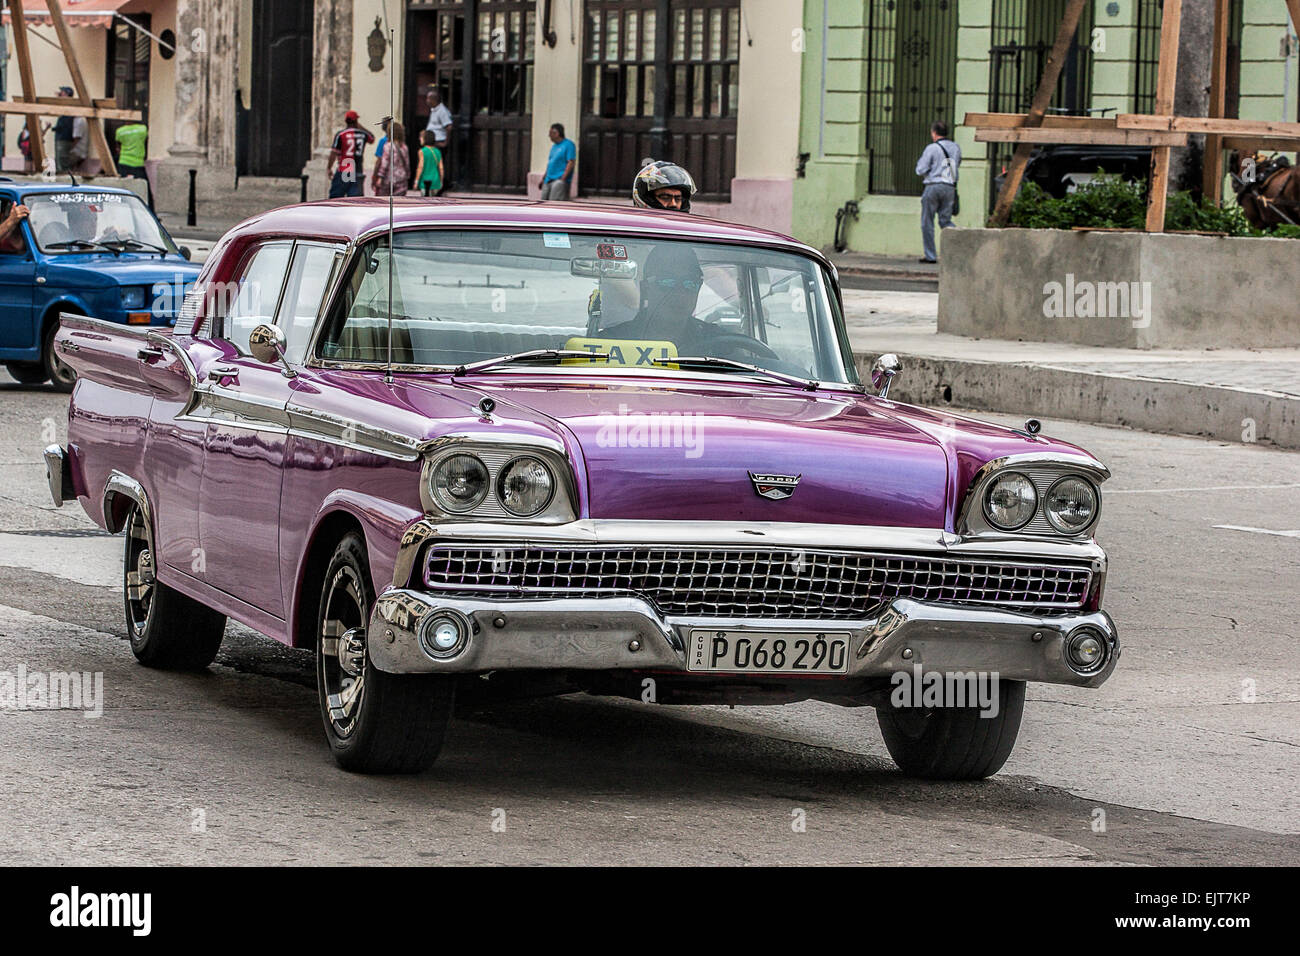 Old American purple car used as a taxi on the street in Old Havana in Cuba Stock Photo